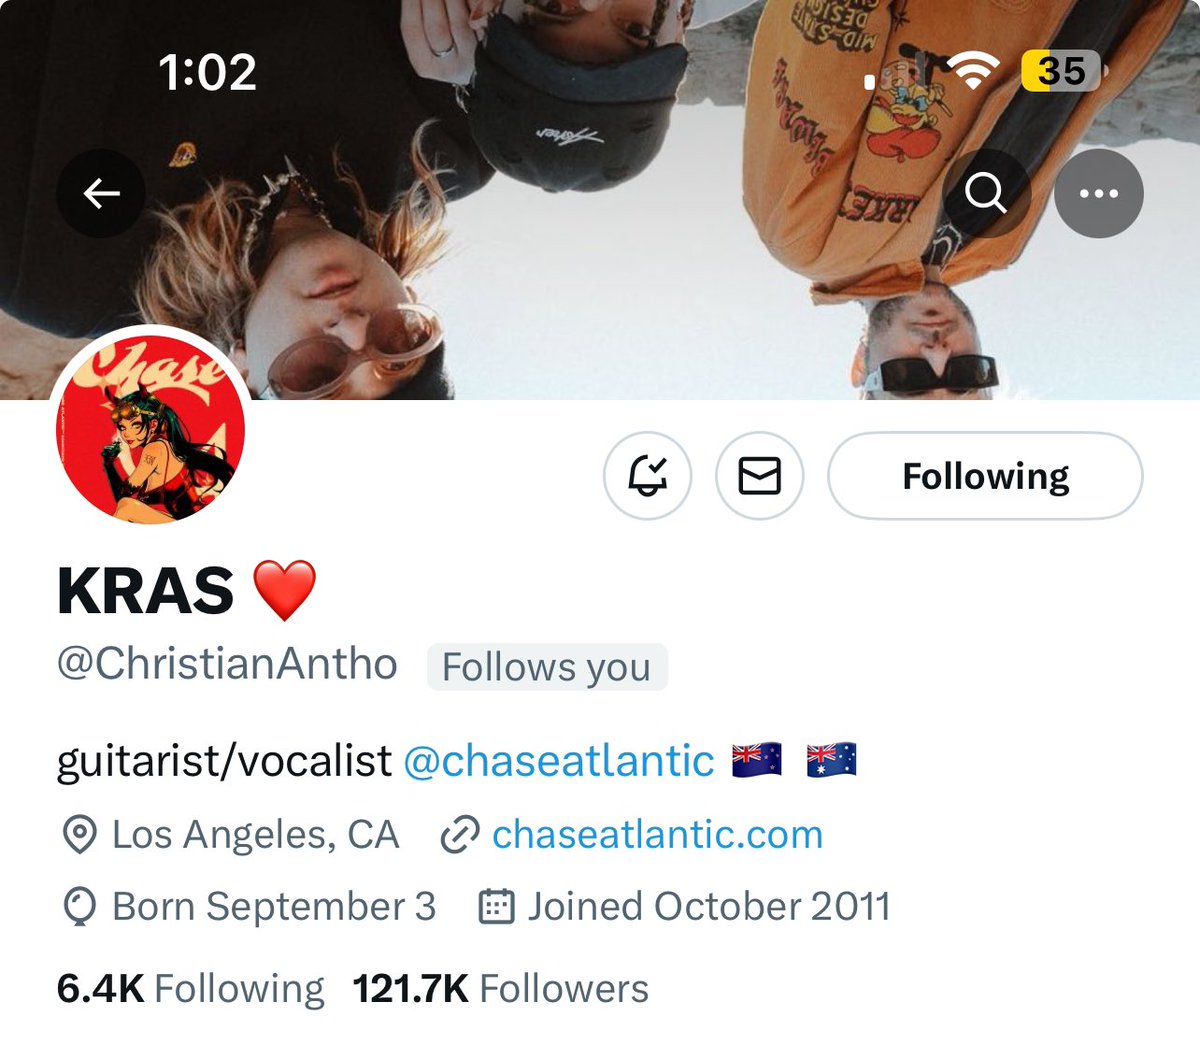 Why is Kras’s banner upside down